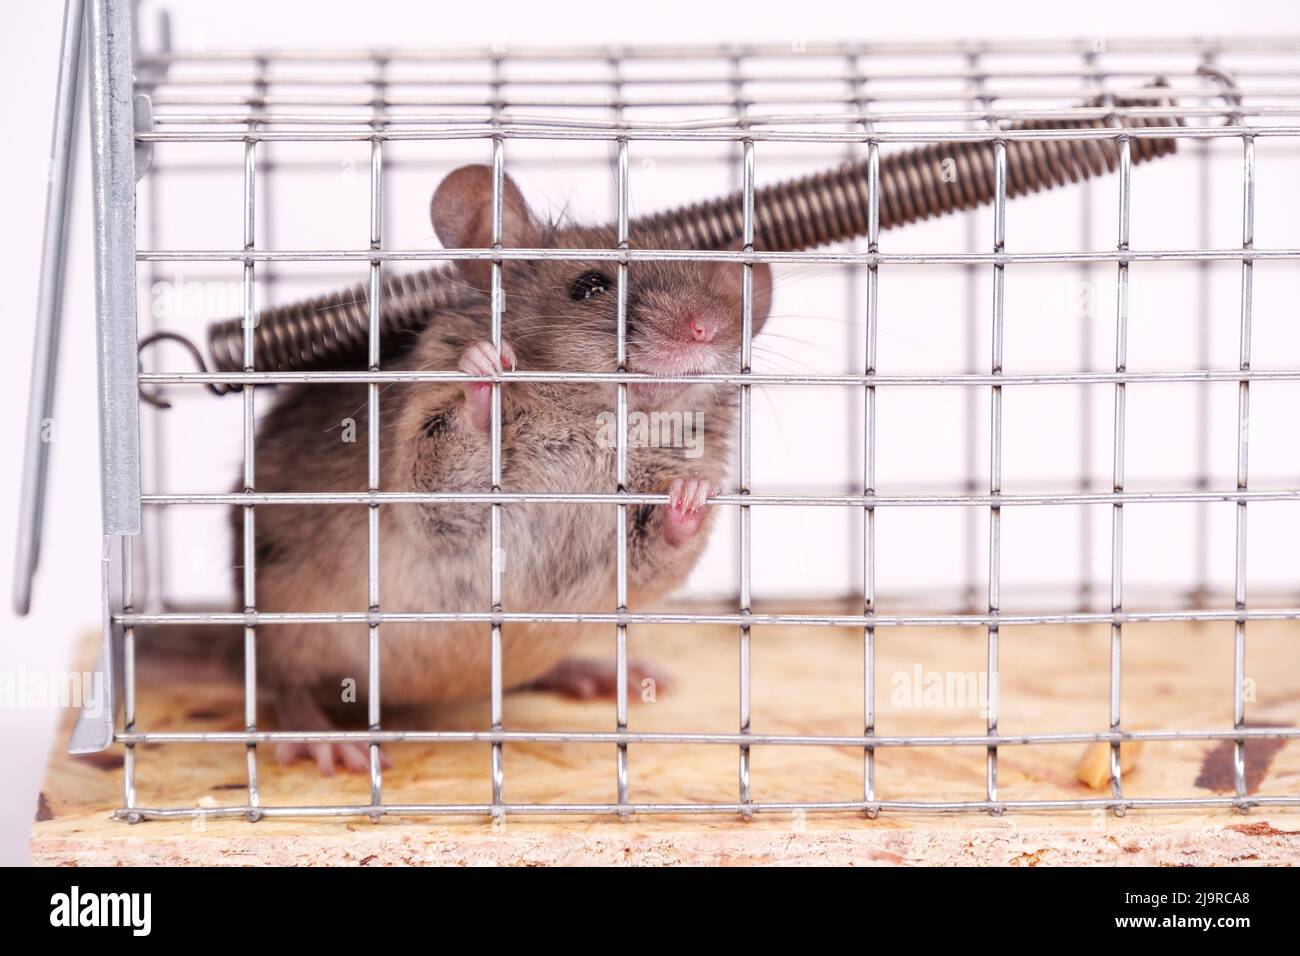 https://c8.alamy.com/comp/2J9RCA8/house-mouse-caught-in-live-capture-mouse-trap-close-up-view-a-cute-little-rodent-in-a-live-cage-on-a-white-background-human-ways-to-catch-a-mouse-i-2J9RCA8.jpg